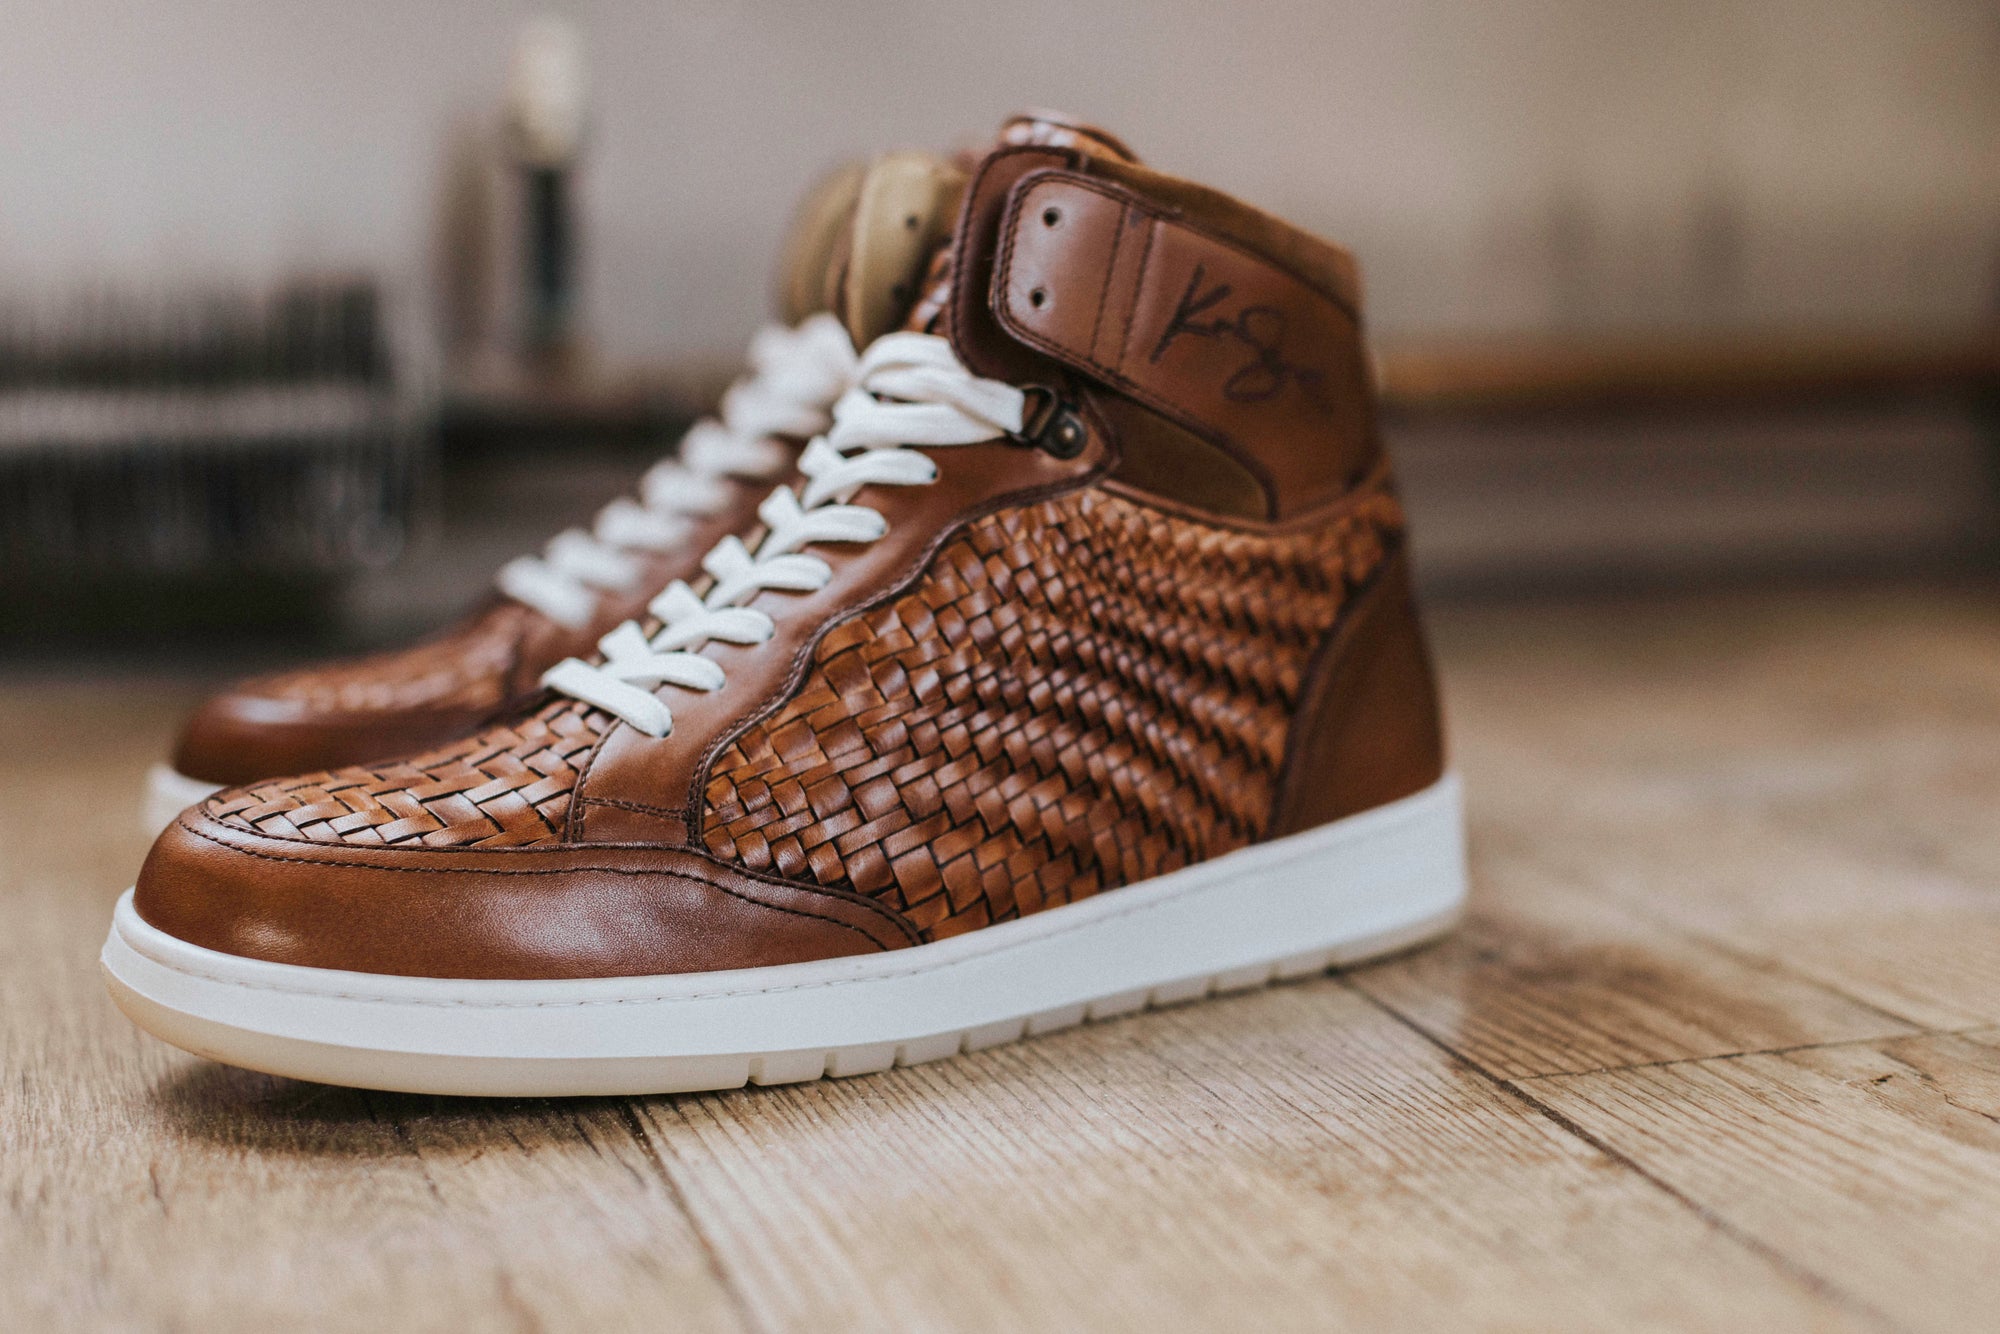 Sole Story: The History of Men’s Hightop Sneakers